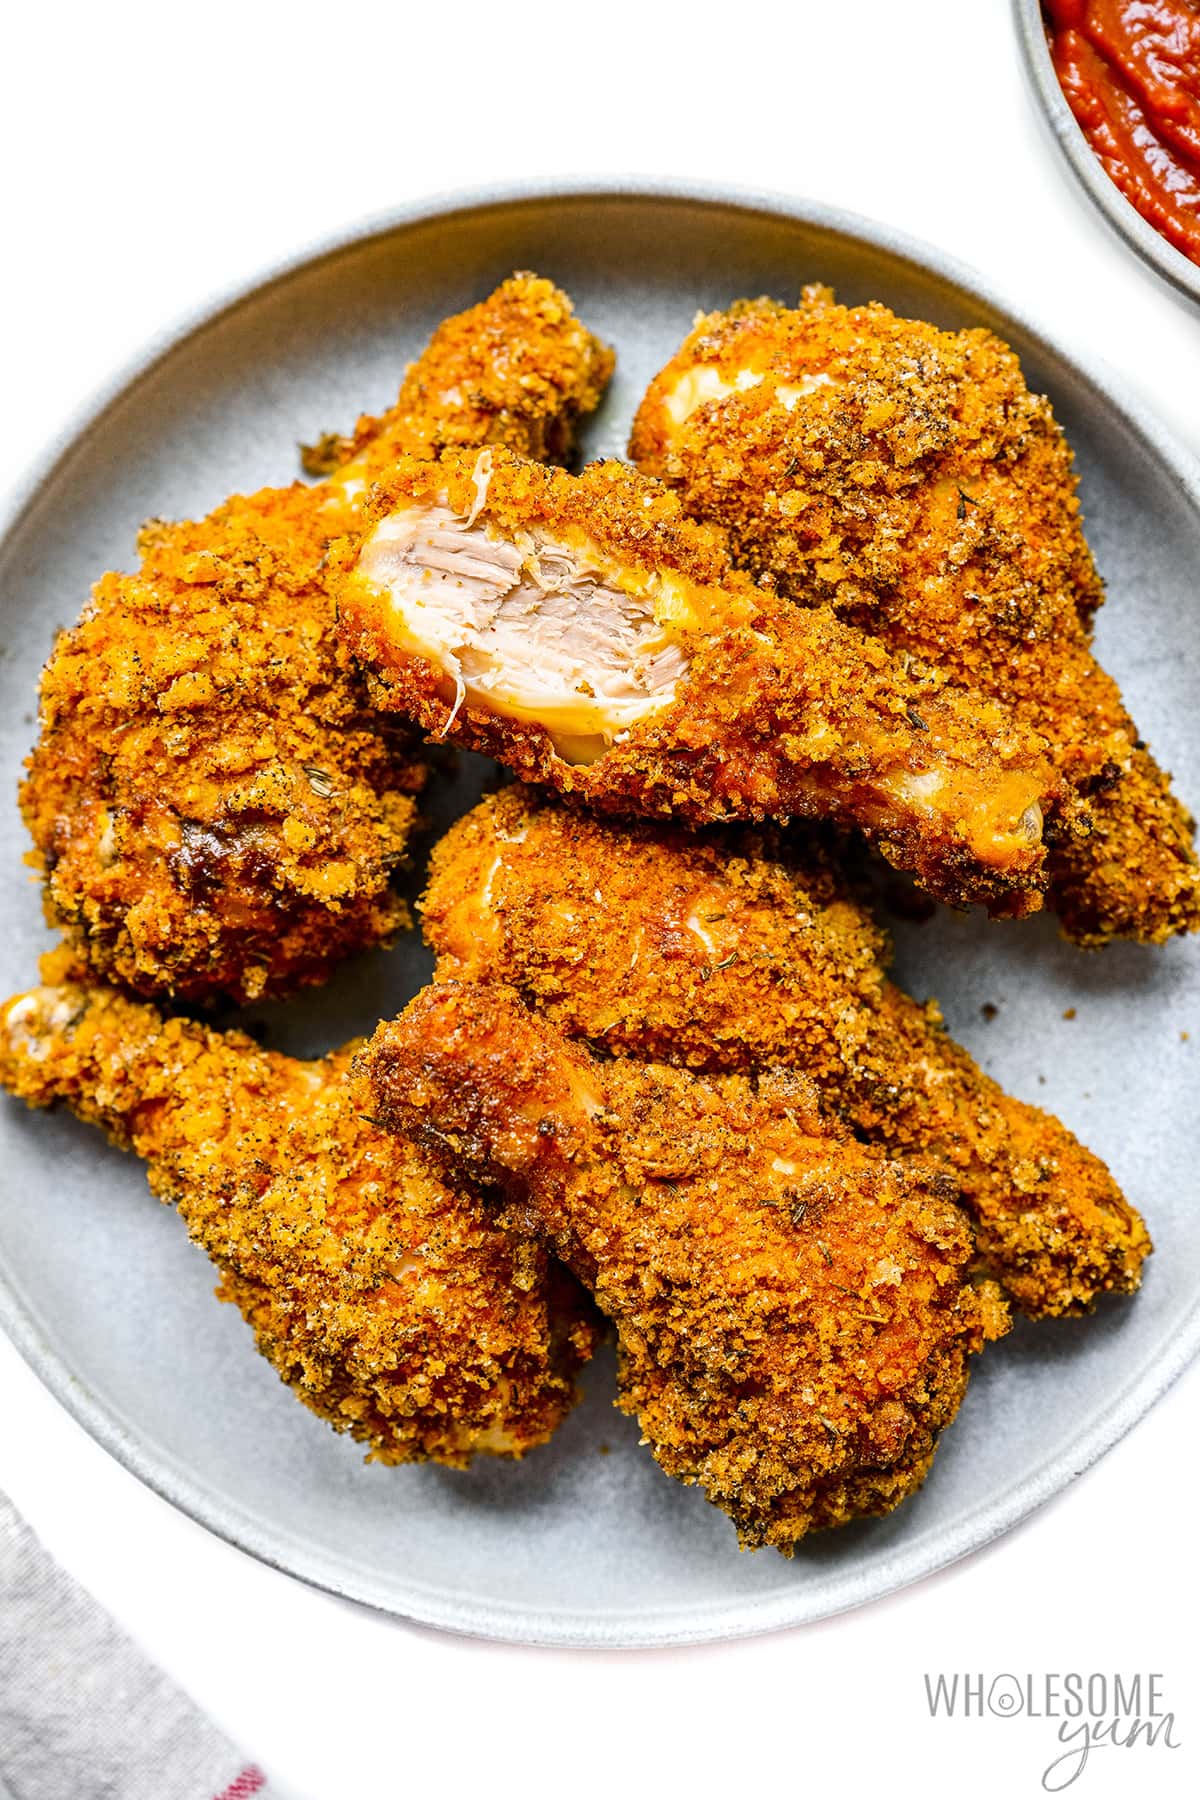 Low carb fried chicken with a bite out of one leg.